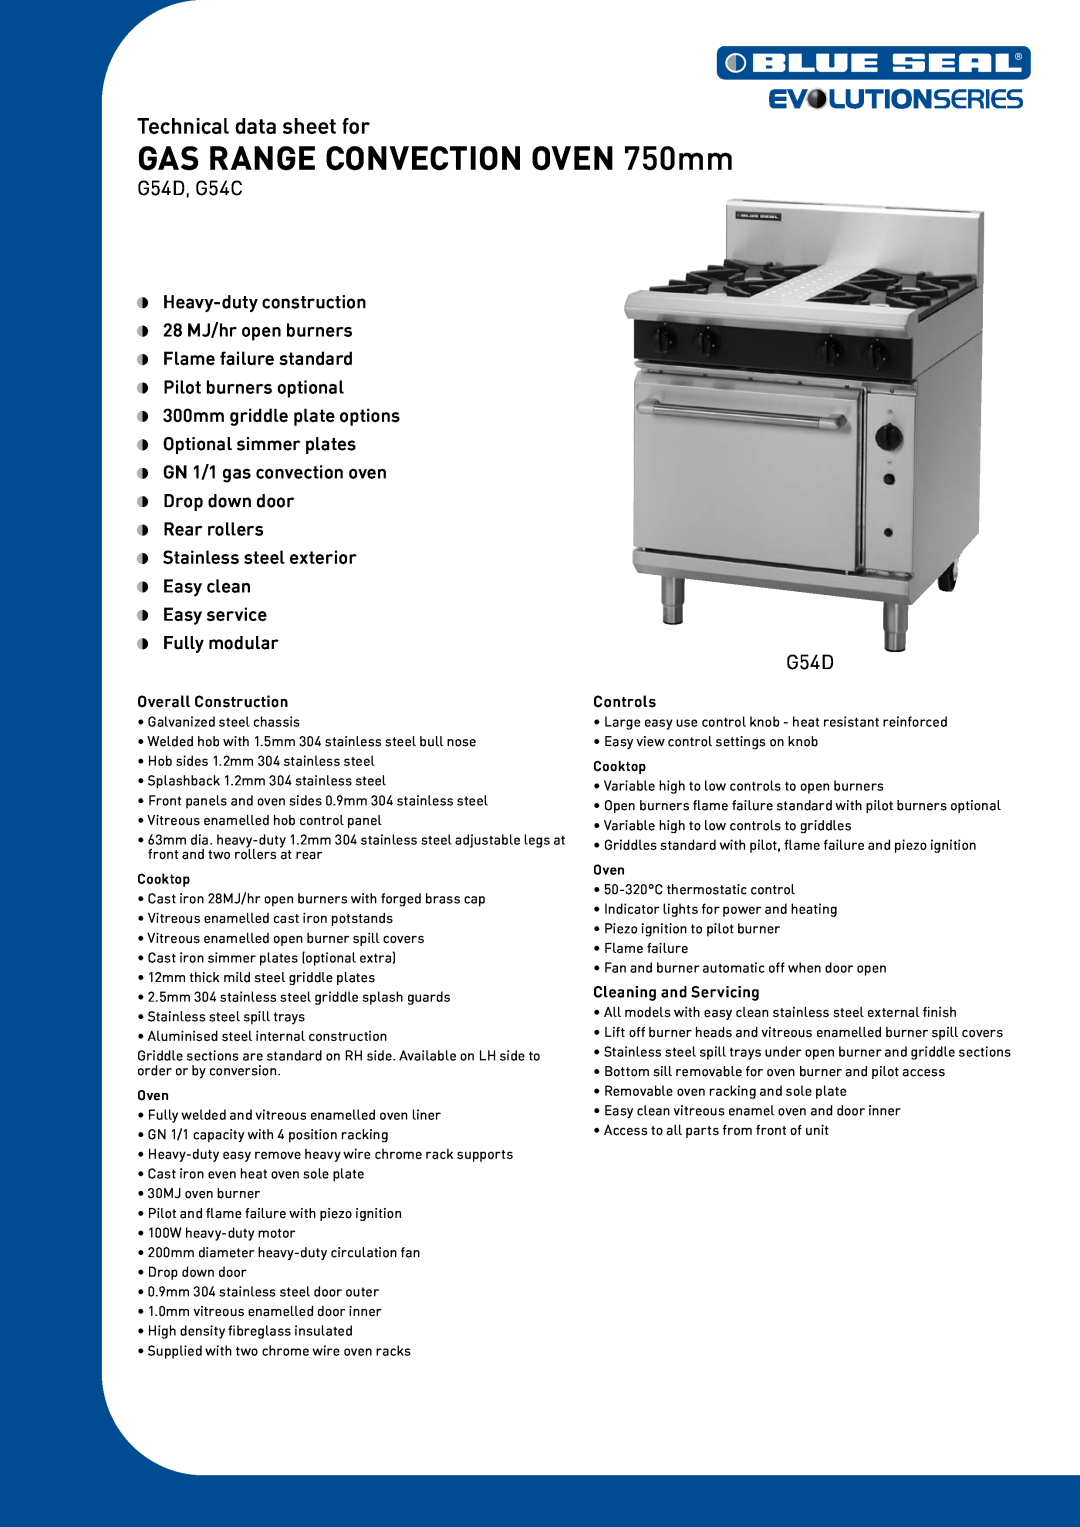 Moffat manual GAS RANGE CONVECTION OVEN 750mm, Technical data sheet for, Overall Construction, Controls, G54D, G54C 